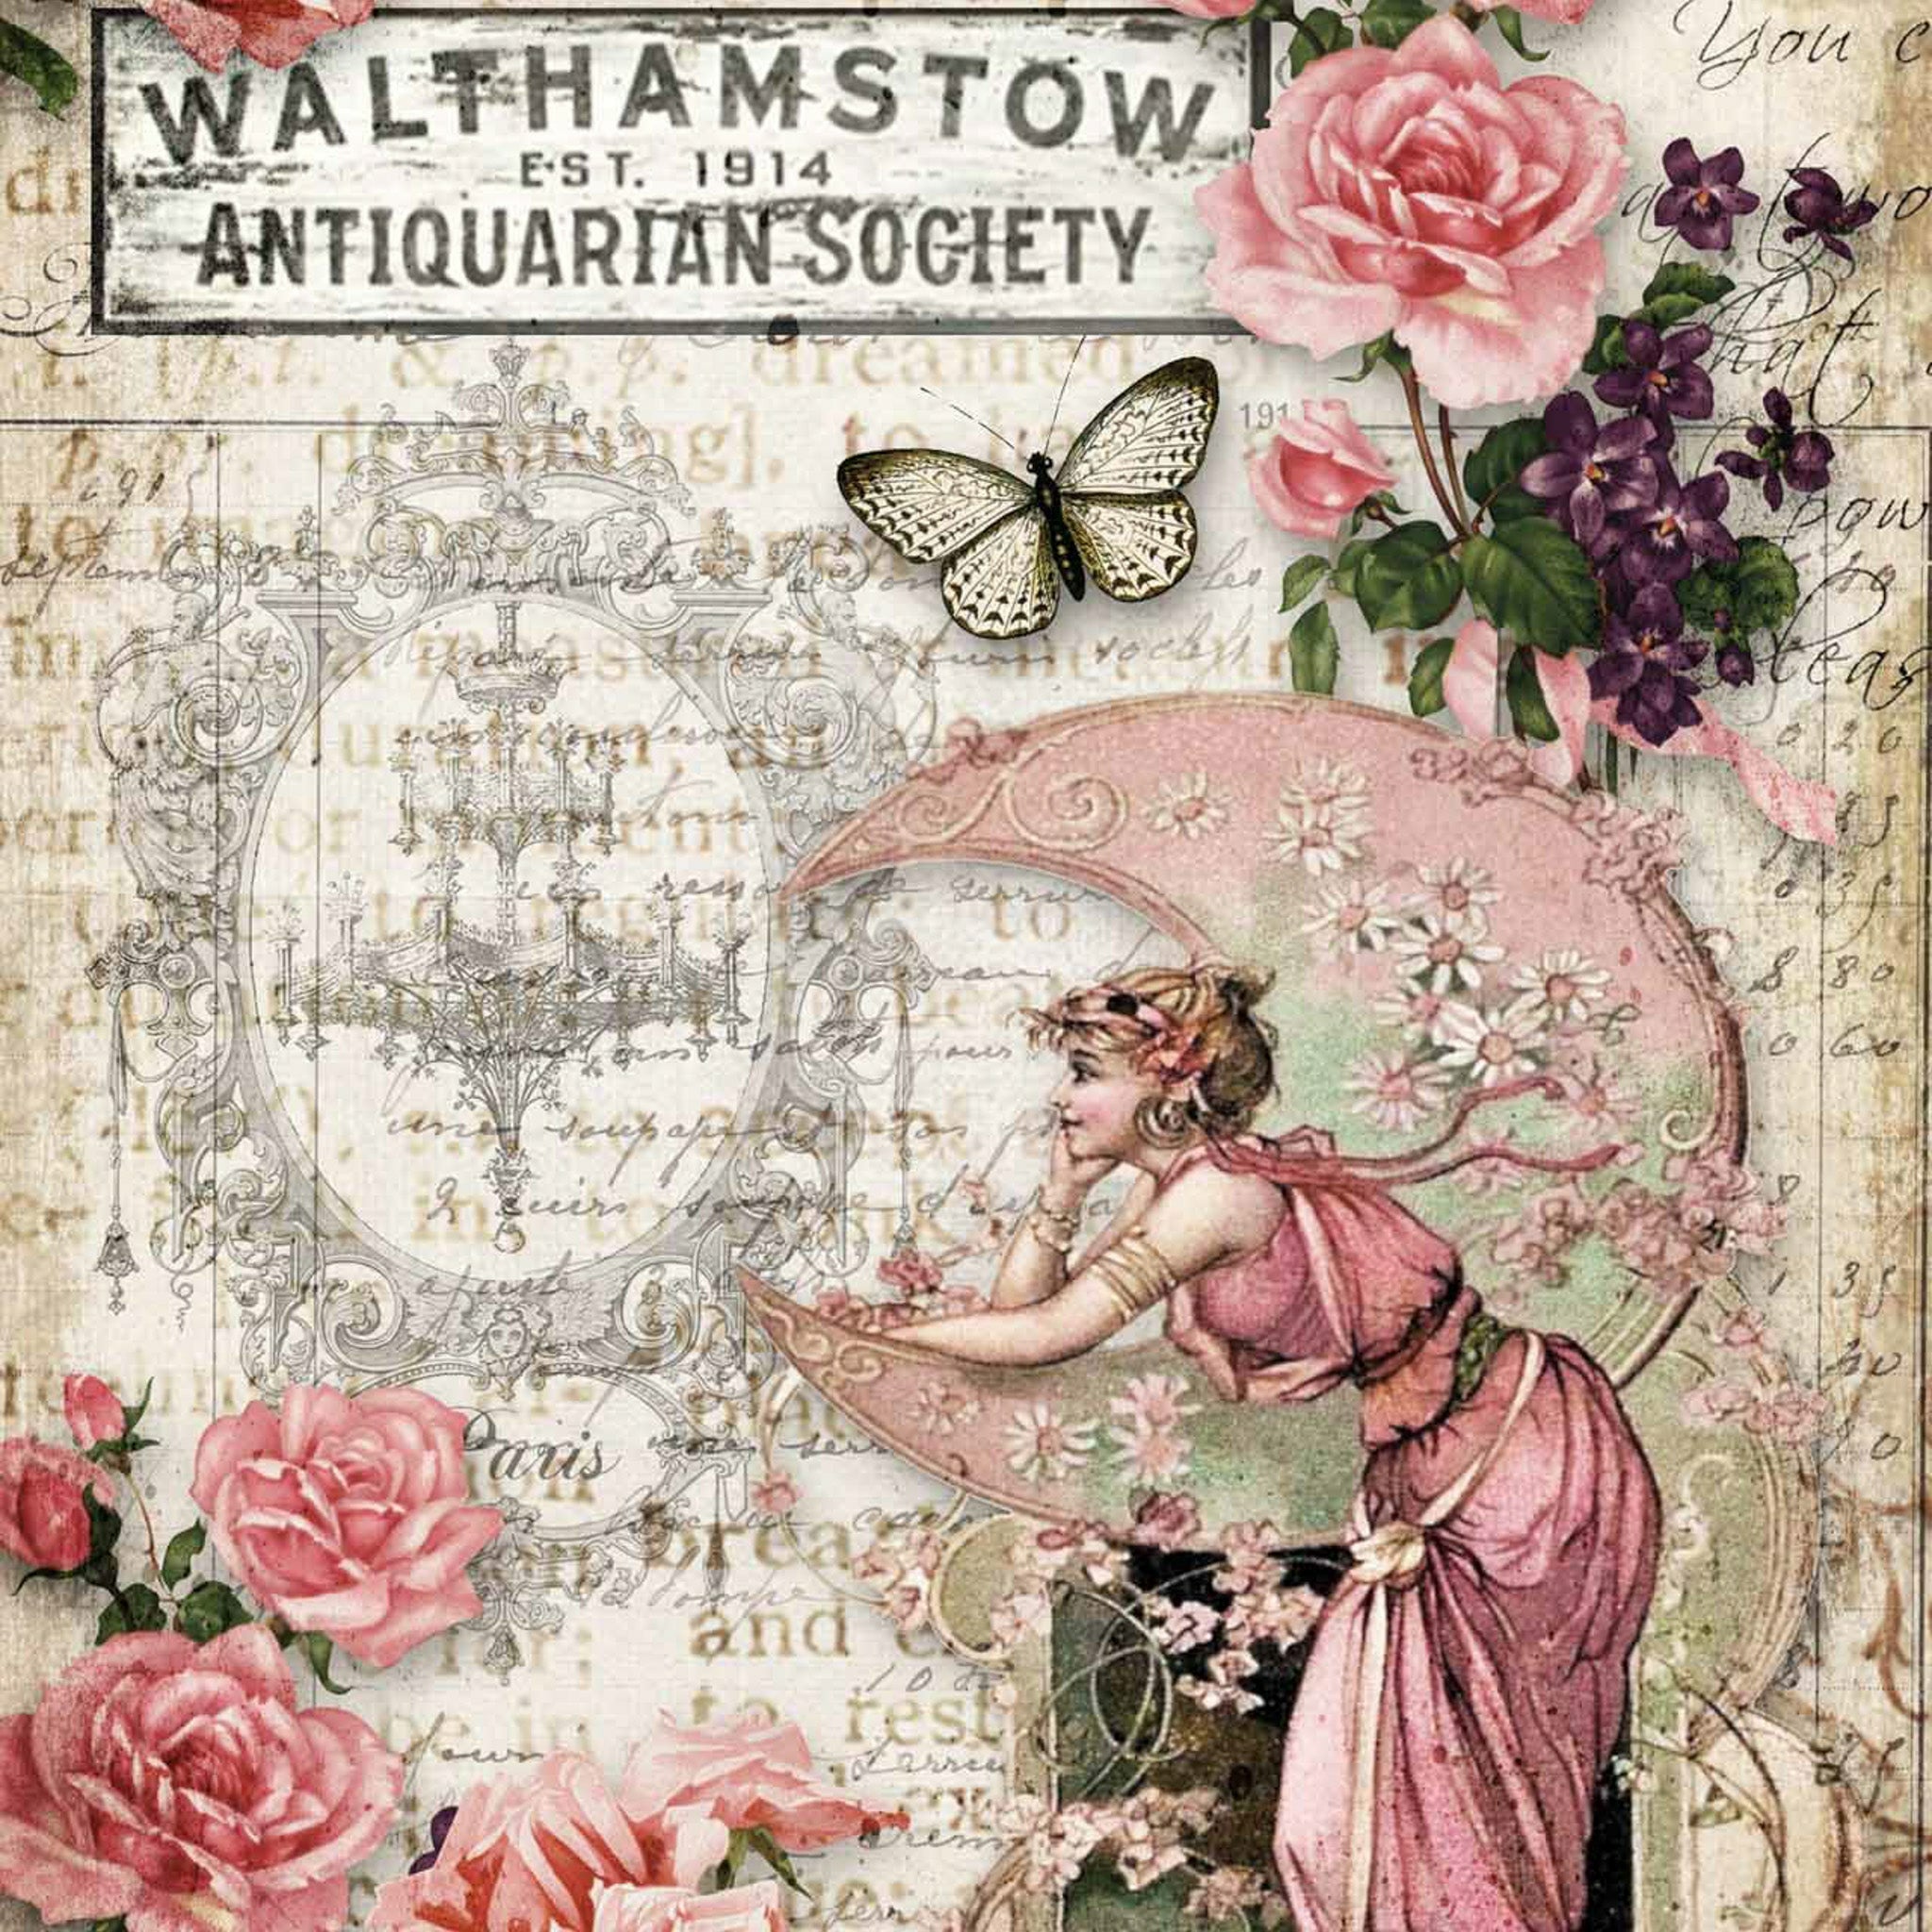 Close-up of an A2 rice paper design that features vintage parchment with writing, large pink roses, a butterfly, vintage signs, and a woman in a pink dress resting on a pale pink crescent moon.